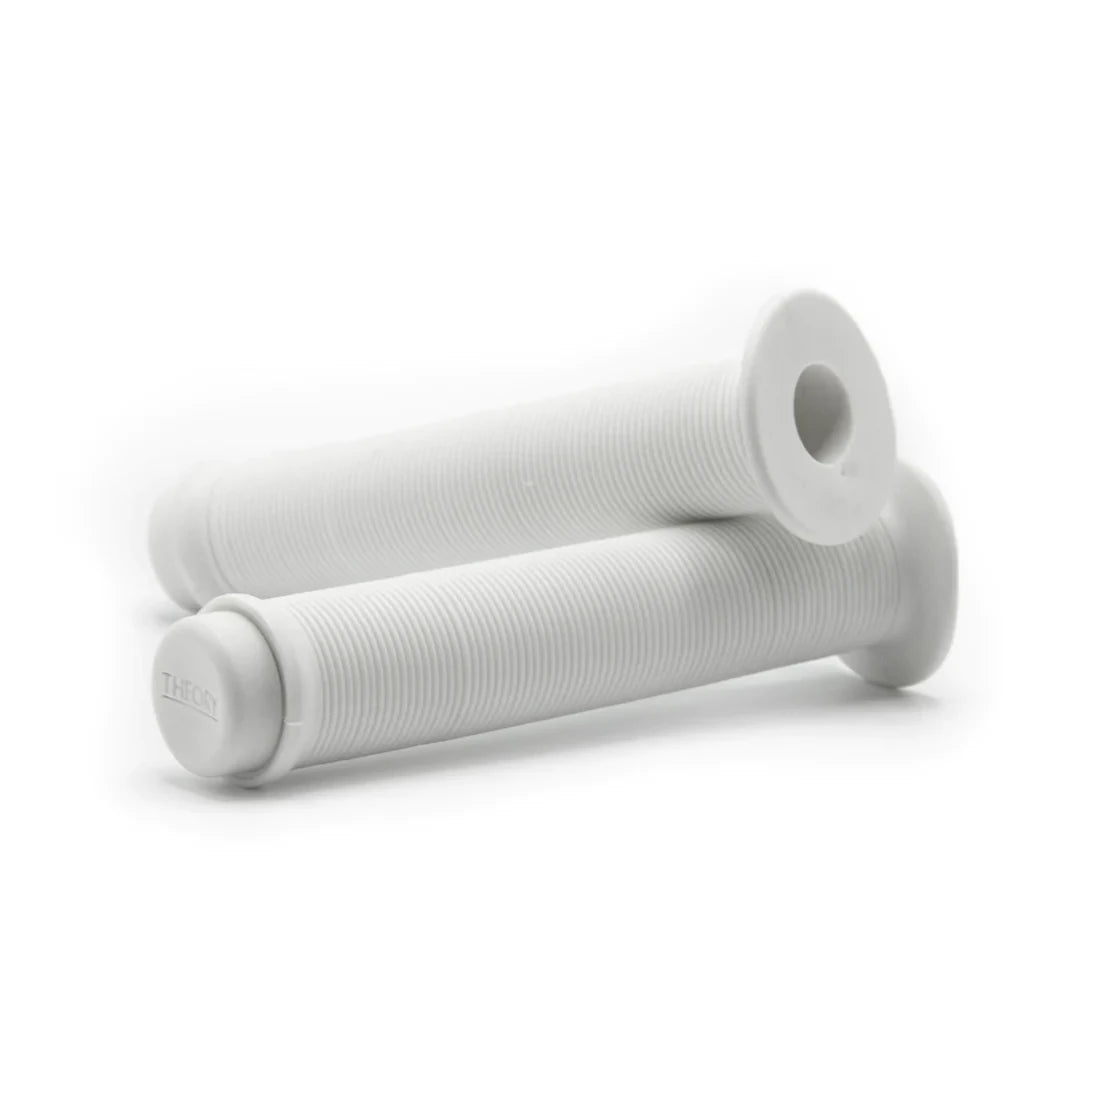 Theory Data Grips w/ Bar Ends - Flanged - White